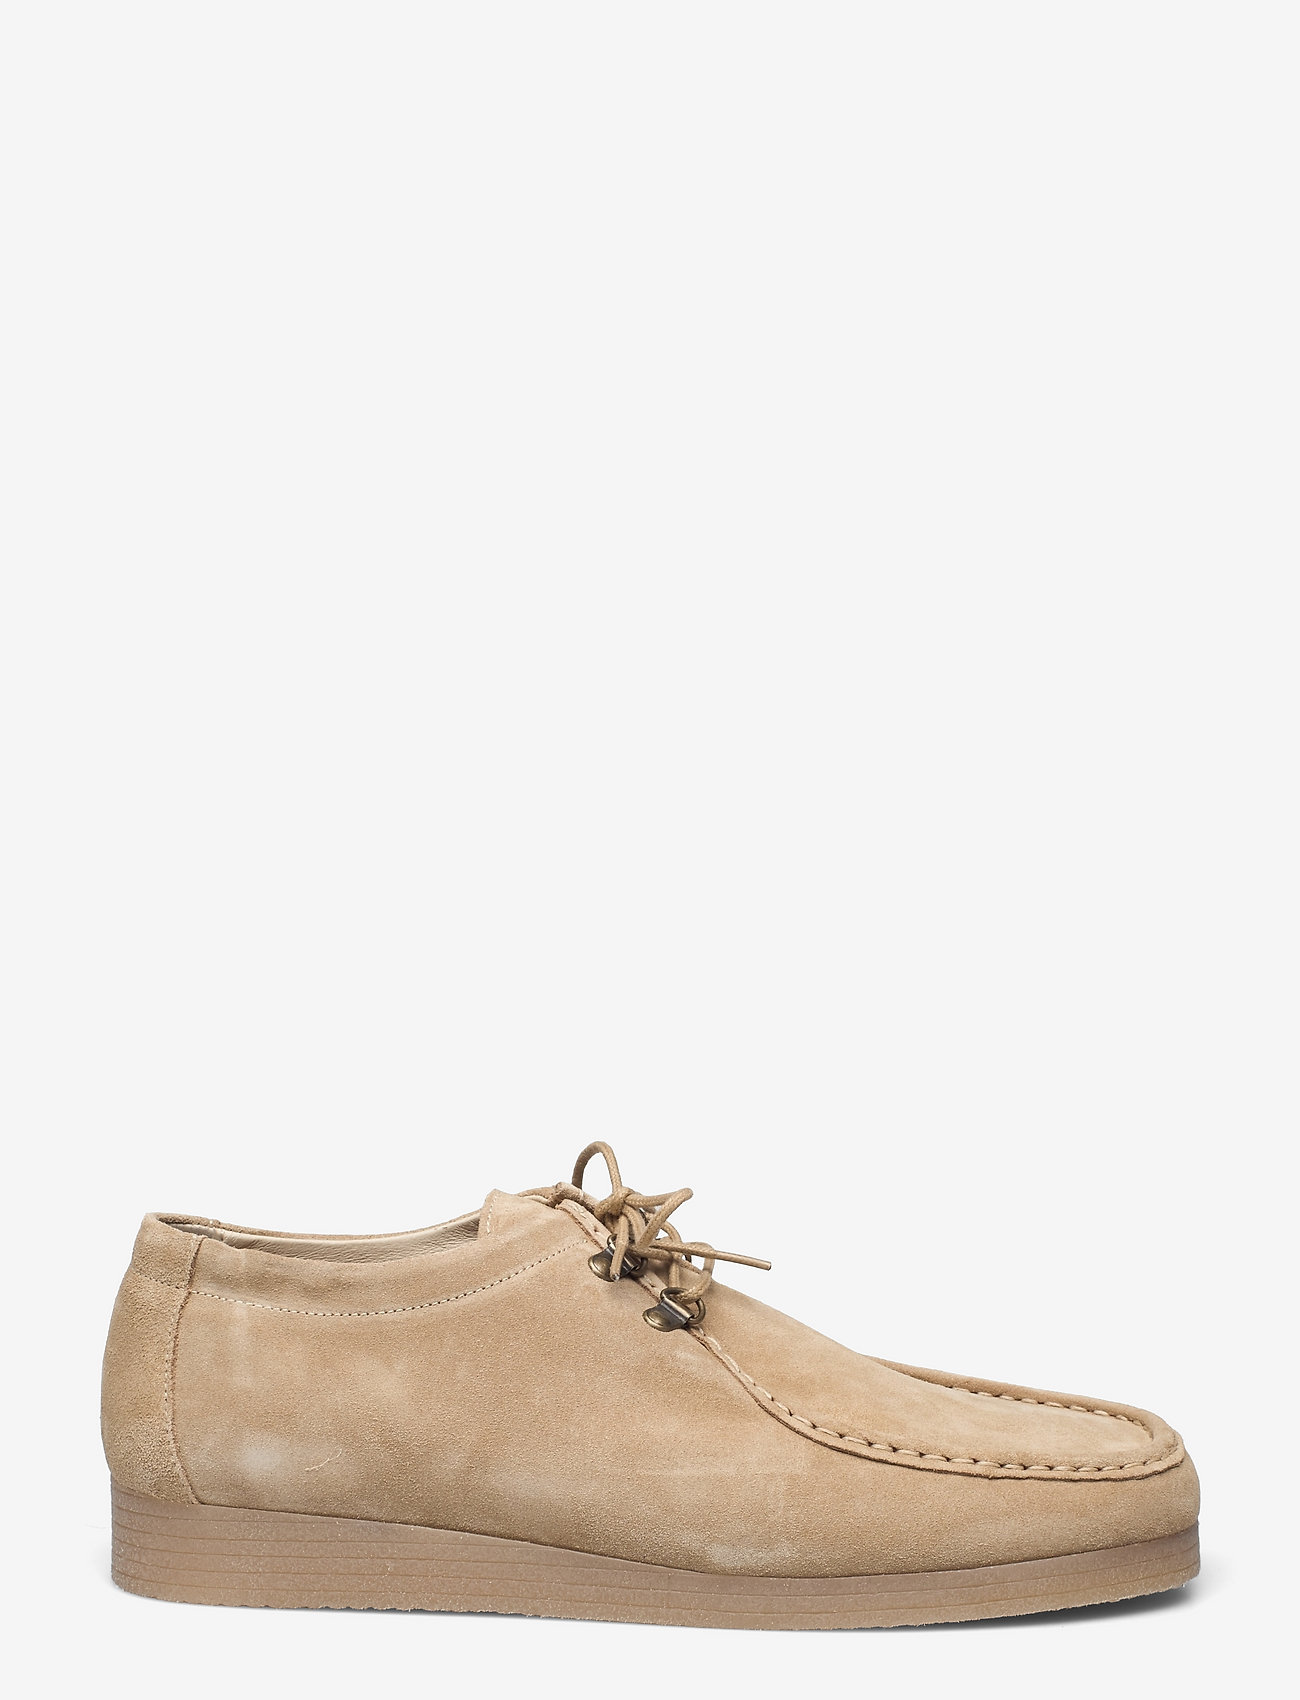 Selected Homme - SLHCHRISTOPHER SUEDEALLABEE - „chukka“ tipo batai - sand - 1